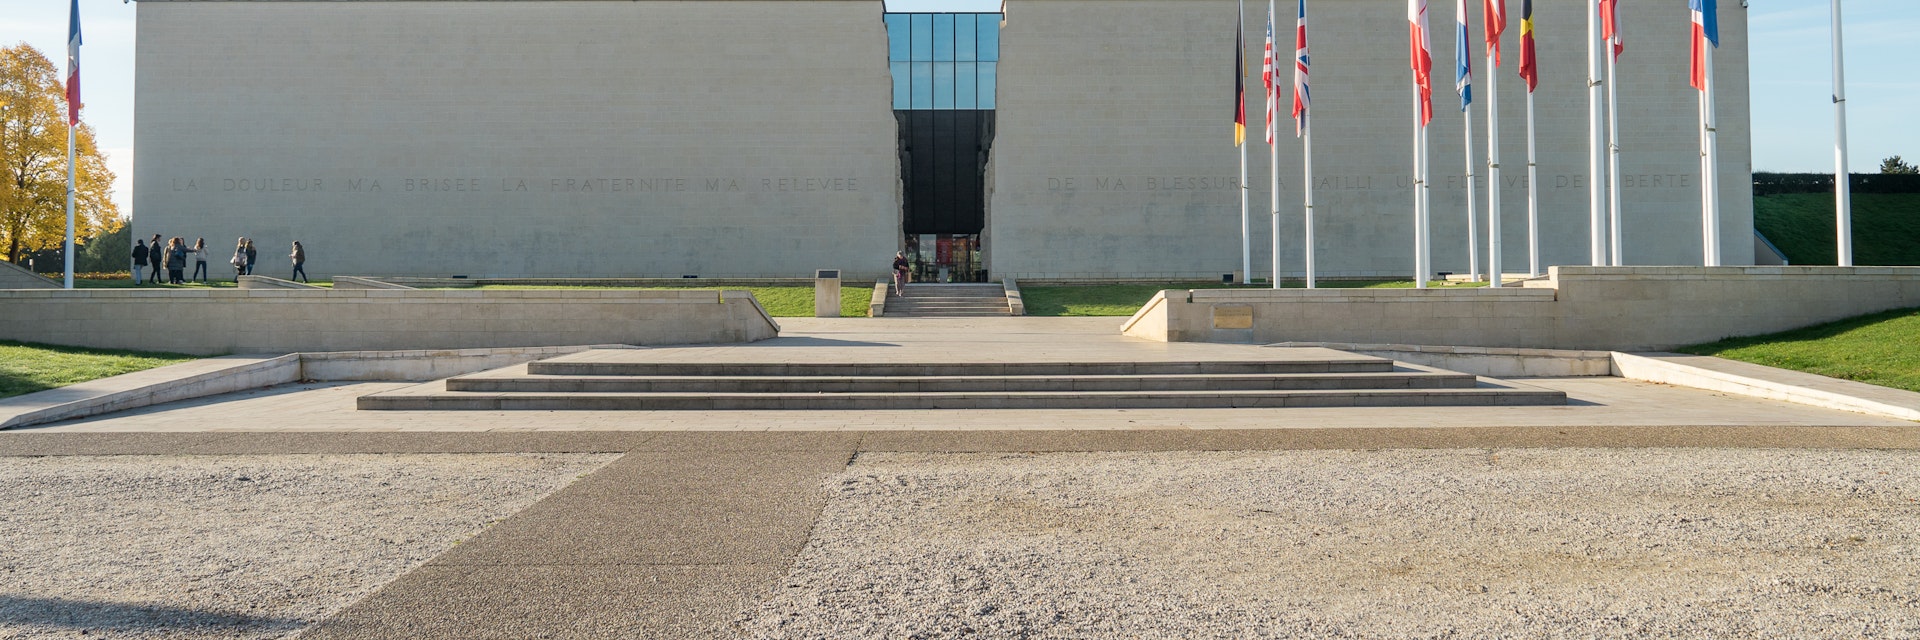 CAEN, FRANCE - OCTOBER 22, 2016: The Memorial de Caen is a museum and war memorial in Caen, Normandy, France commemorating the Second World War and the Battle for Caen.; Shutterstock ID 511924579; Your name (First / Last): Daniel Fahey; GL account no.: 65050; Netsuite department name: Online Editorial; Full Product or Project name including edition: BiT Normandy POIs